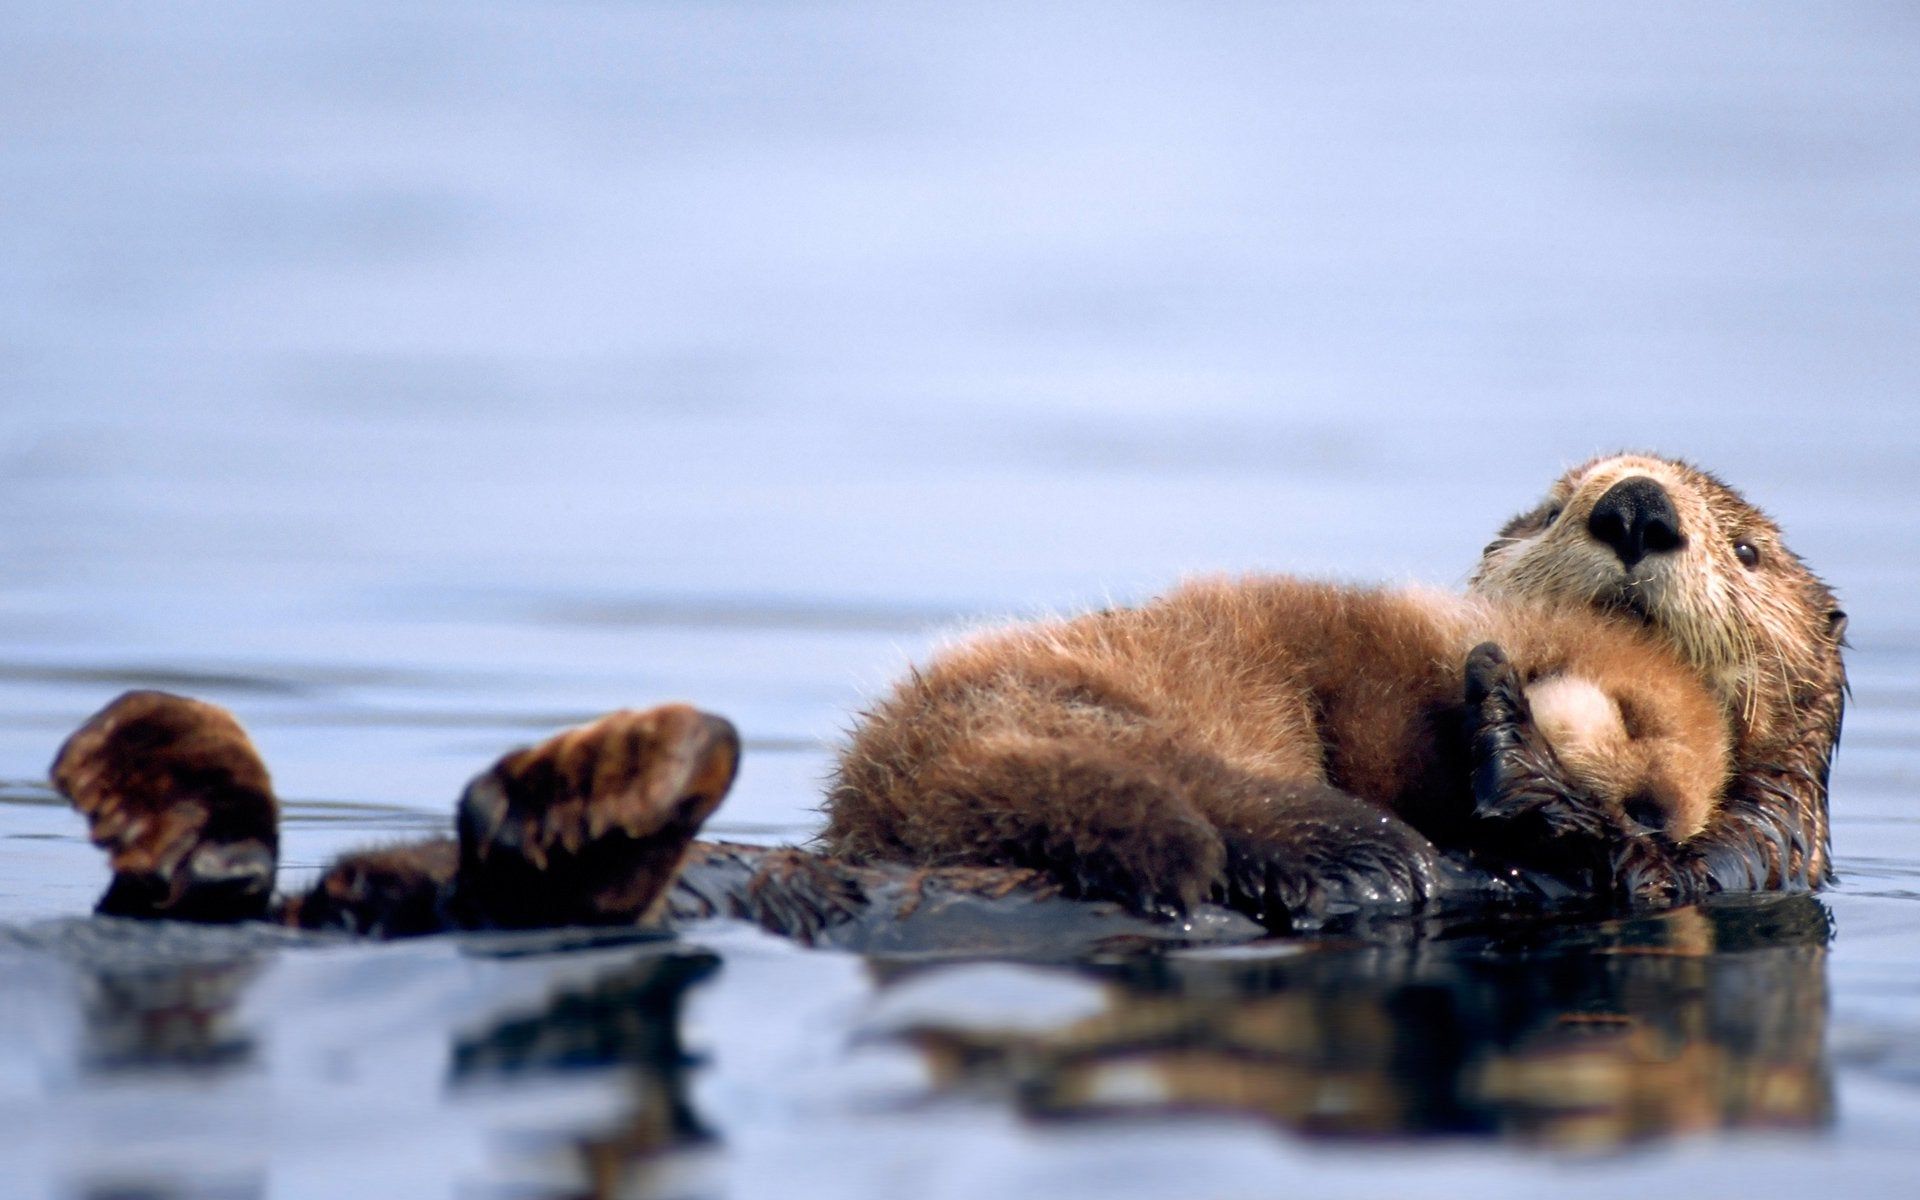 A baby otter with it's mommy